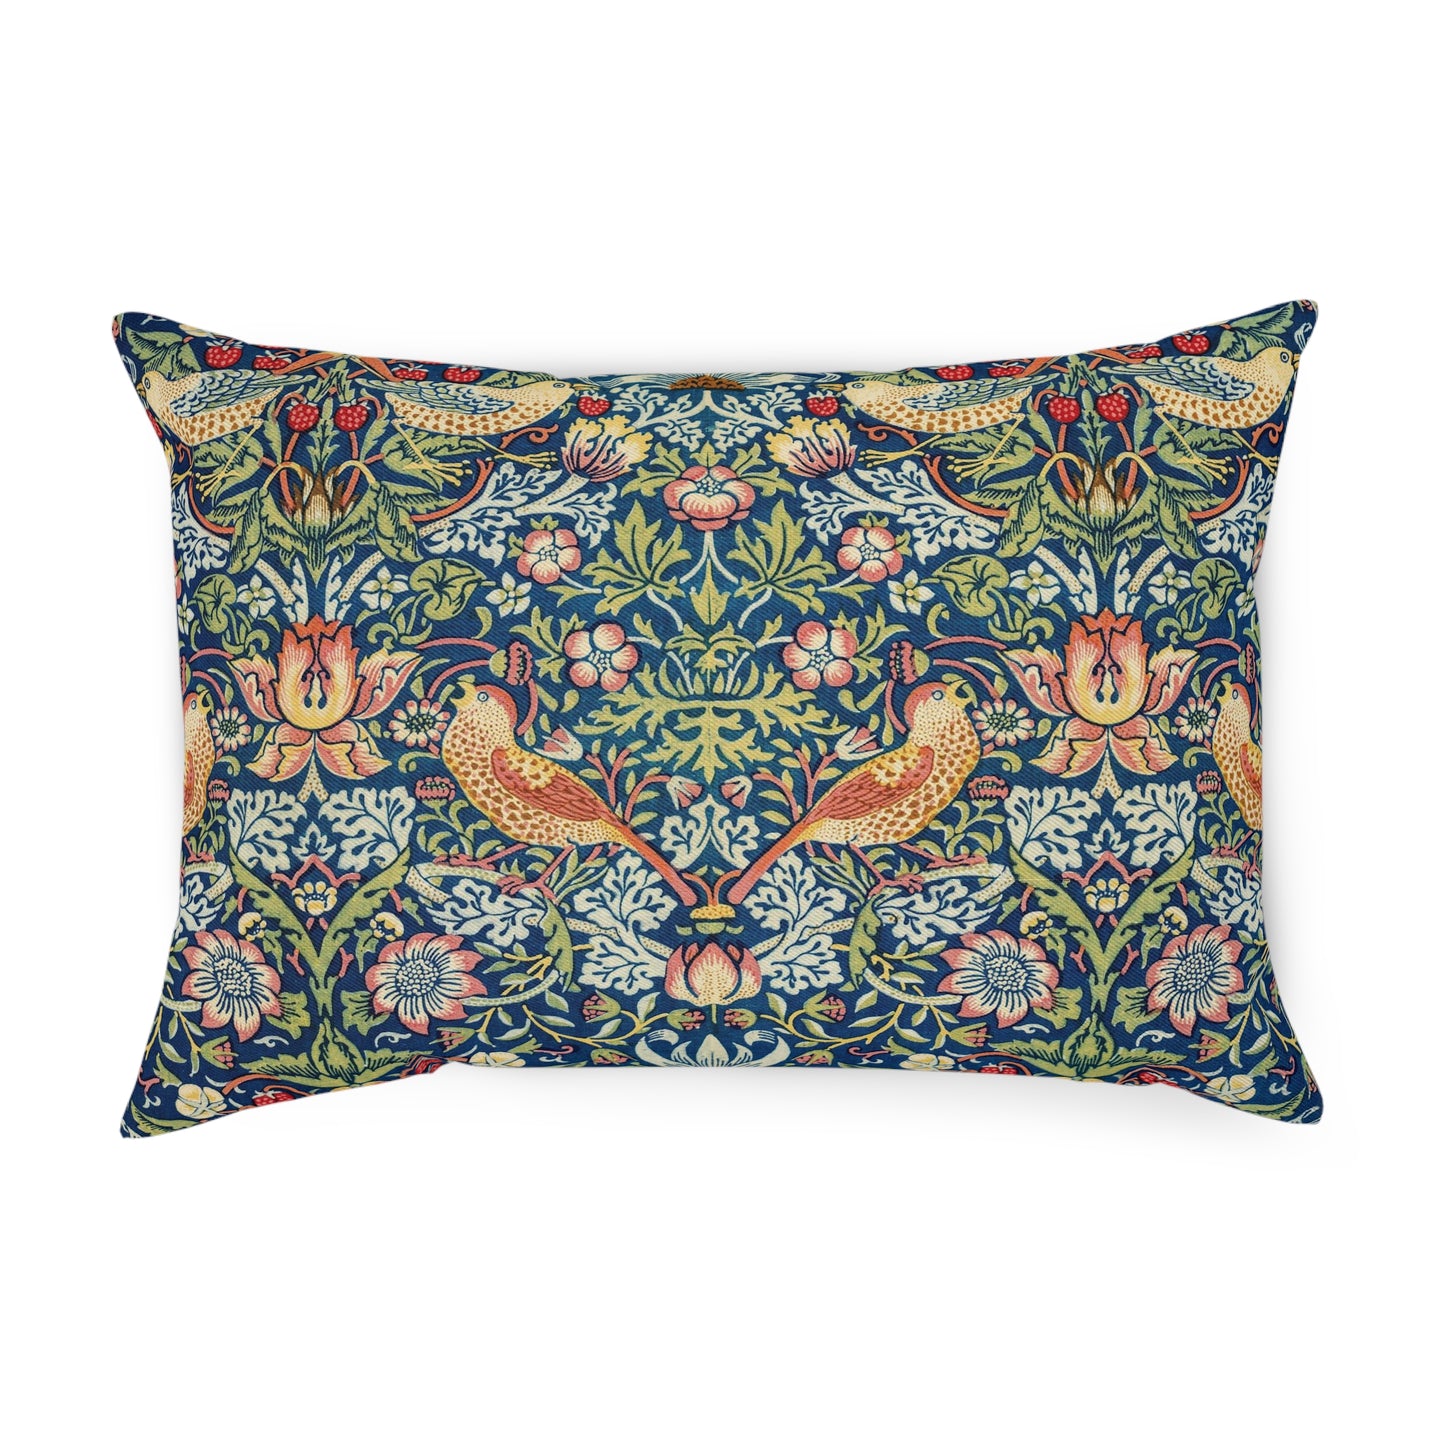 William Morris & Co Cushion and Cover - Strawberry Thief Collection (Indigo)